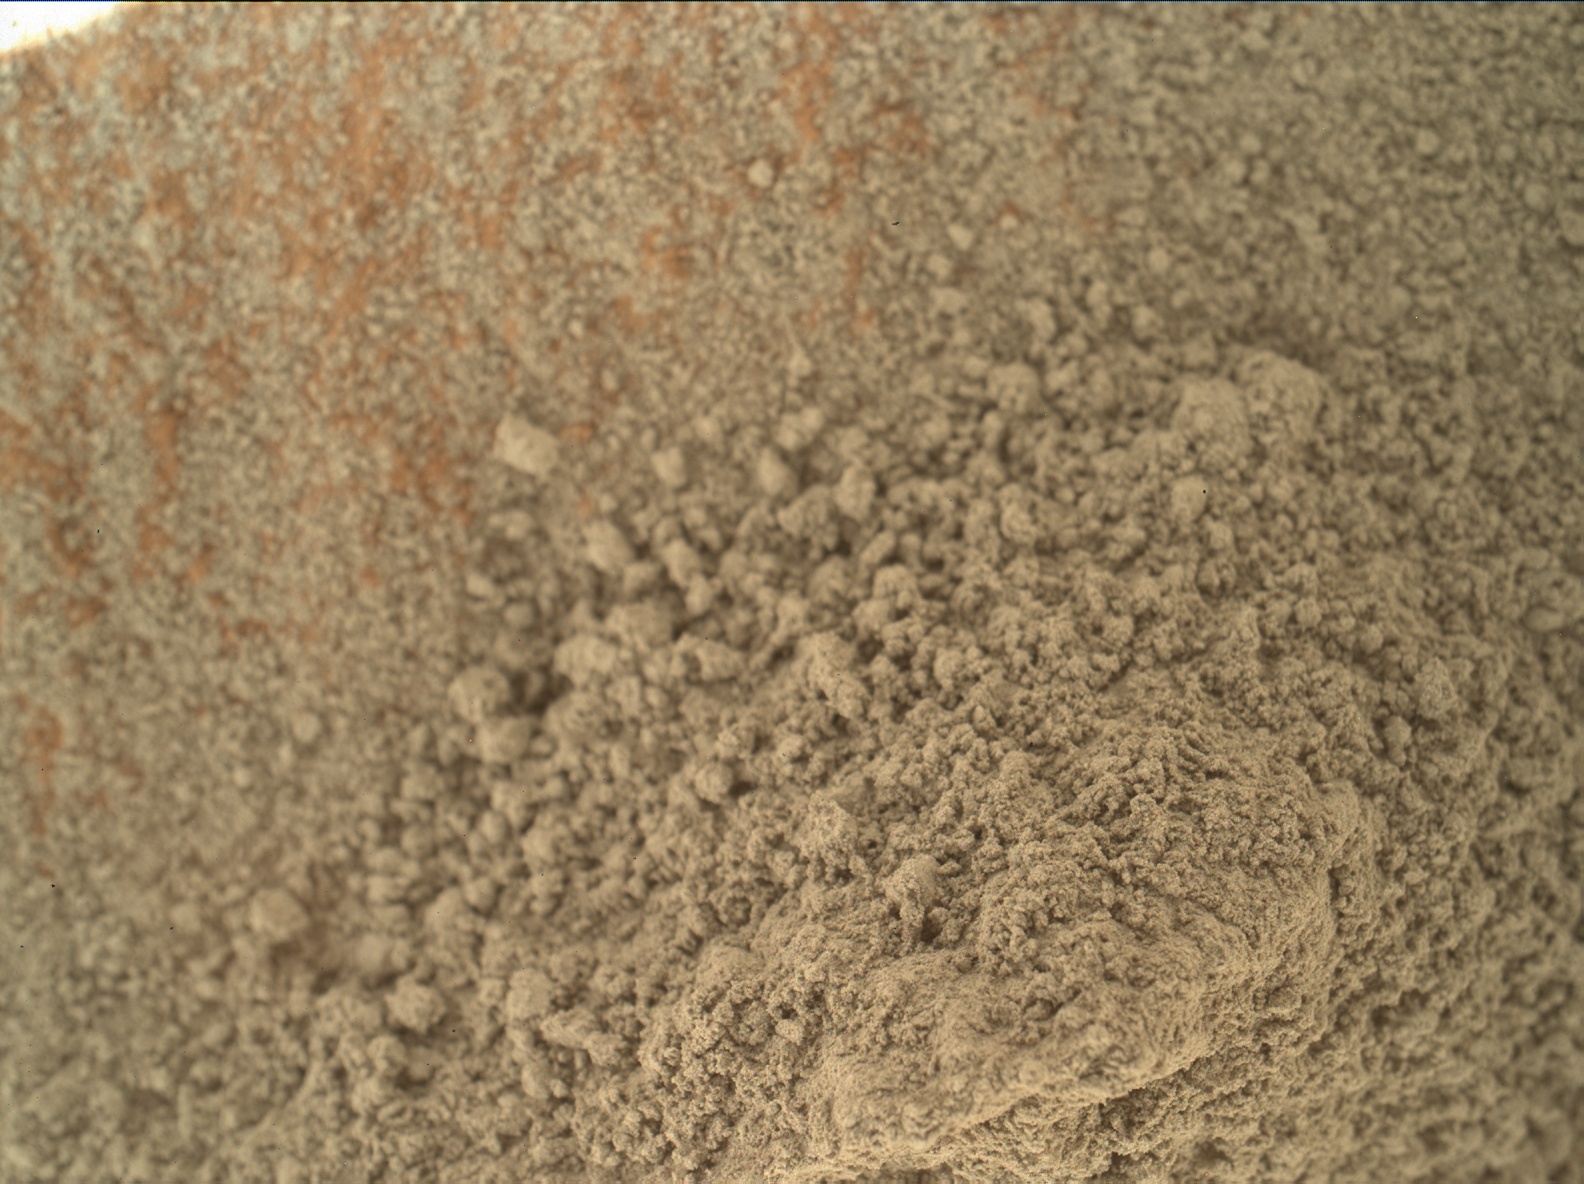 Nasa's Mars rover Curiosity acquired this image using its Mars Hand Lens Imager (MAHLI) on Sol 487